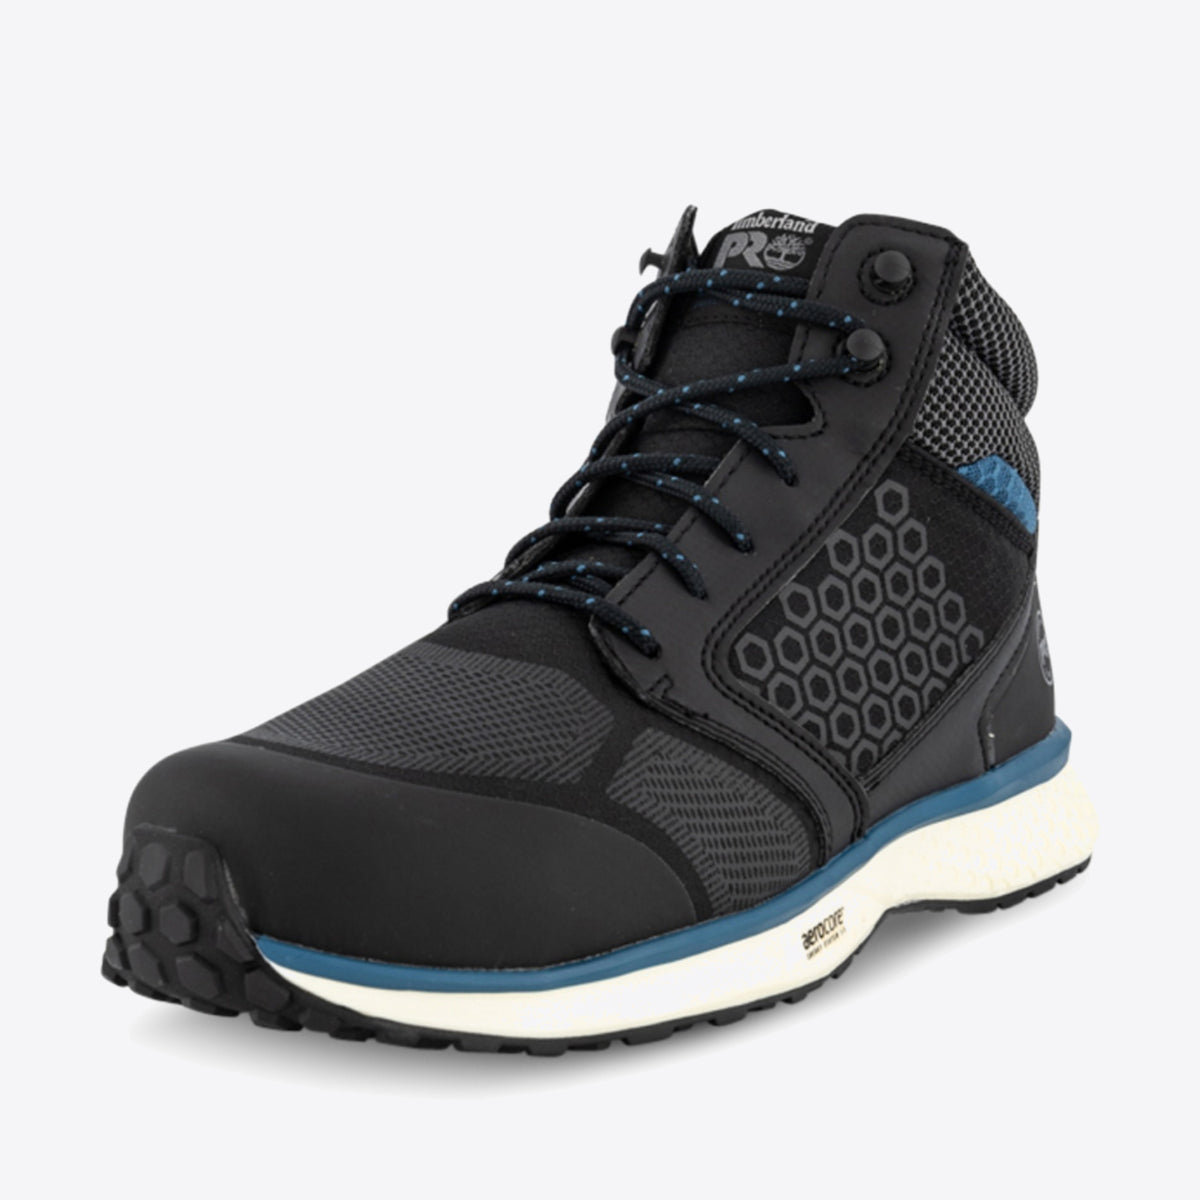 TIMBERLAND PRO Reaxion Mid Black/Blue - Image 8